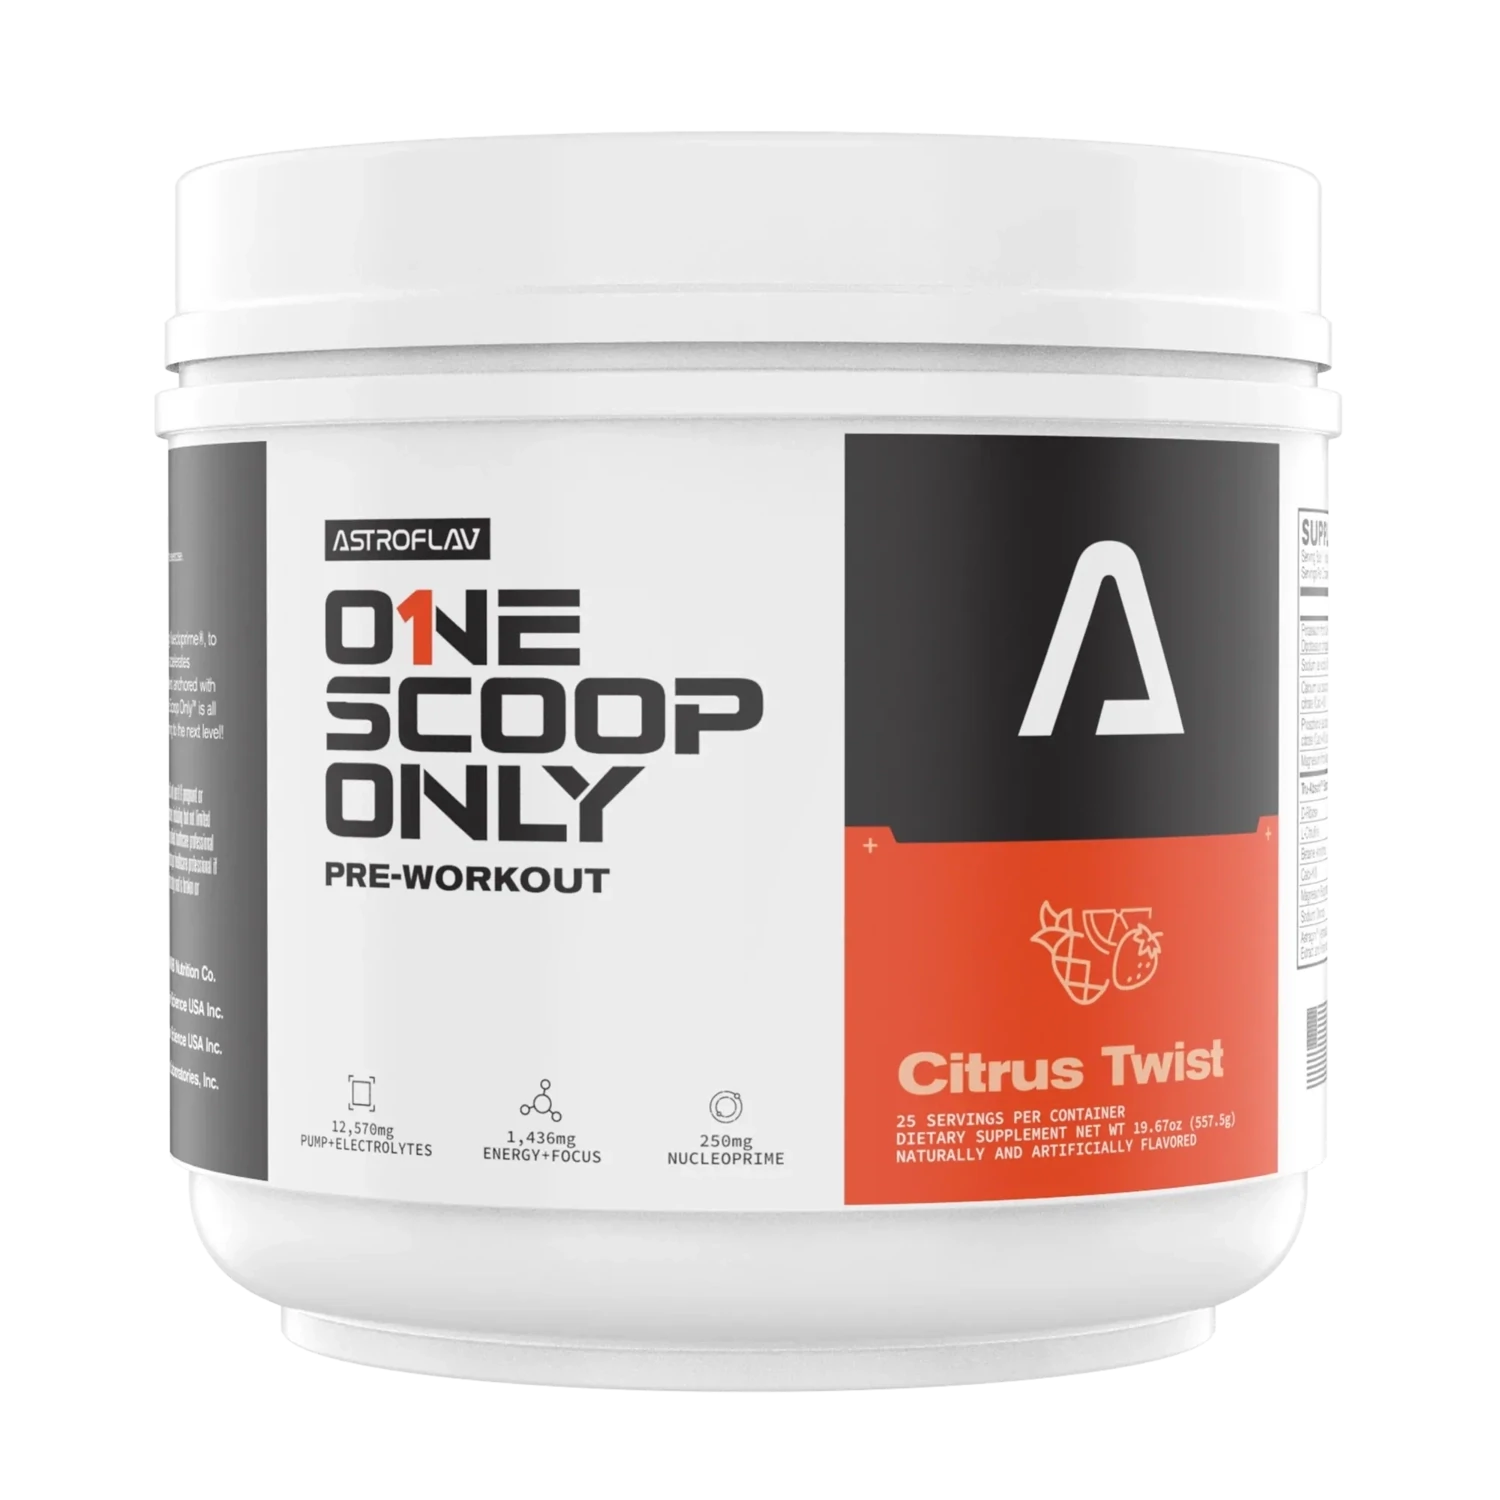 AstroFlav One Scoop Only Pre-Workout